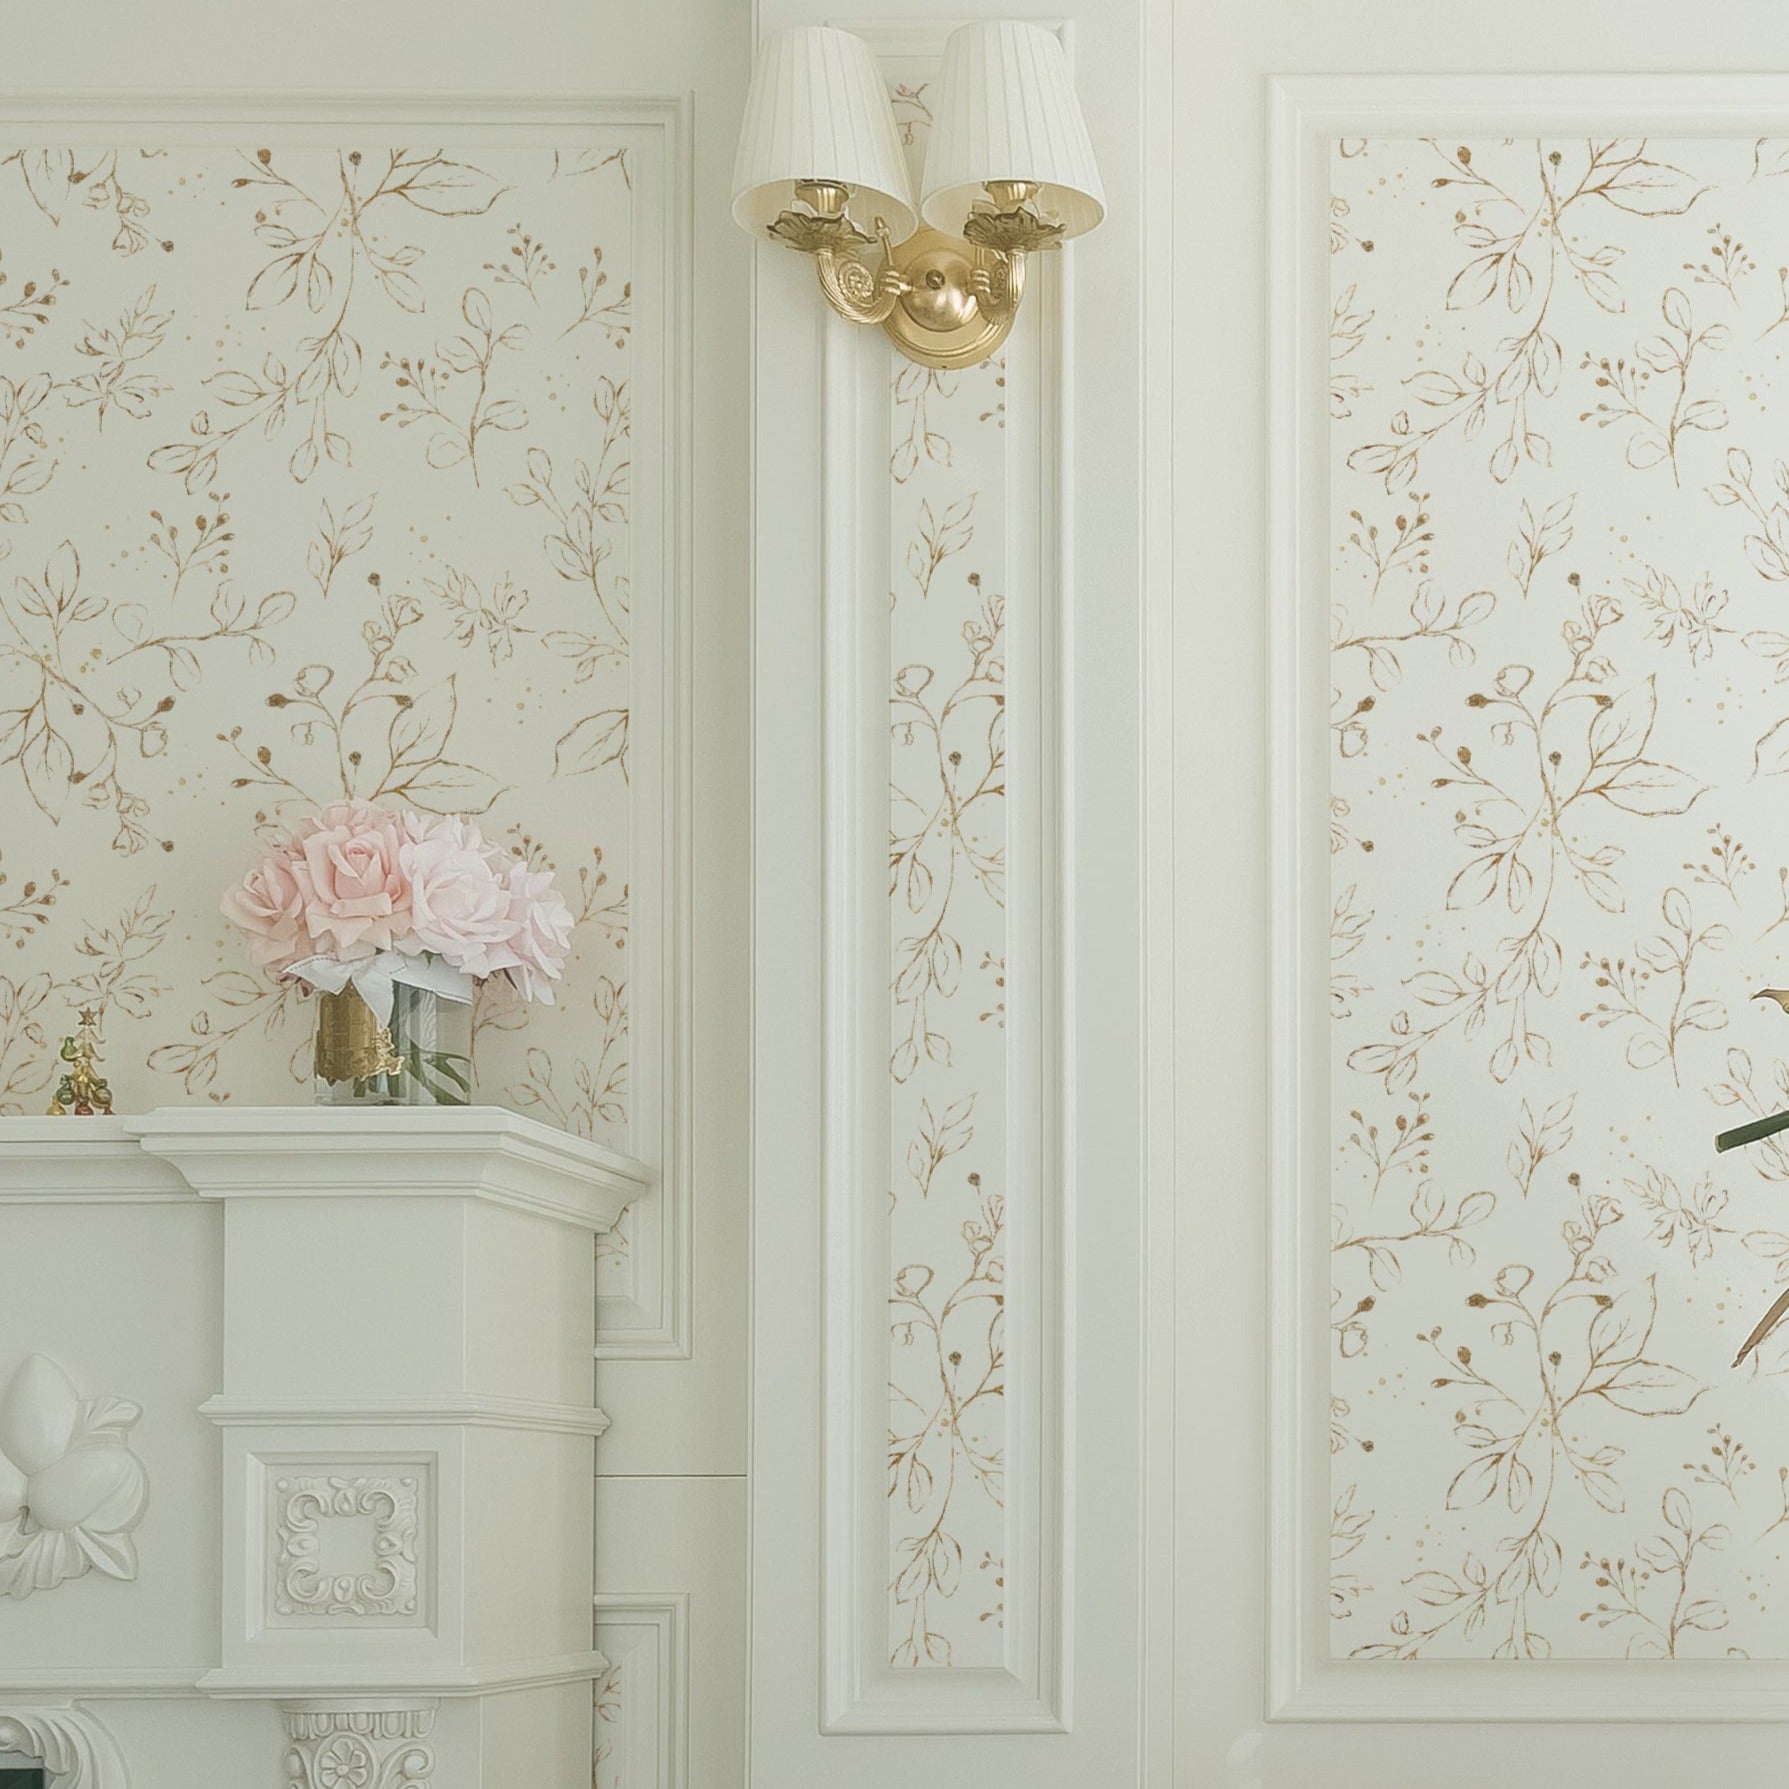 The Gold Leaves Wallpaper graces a classic room with white molding and elegant decor, adding a touch of sophistication with its golden watercolor leaves against the soft background.